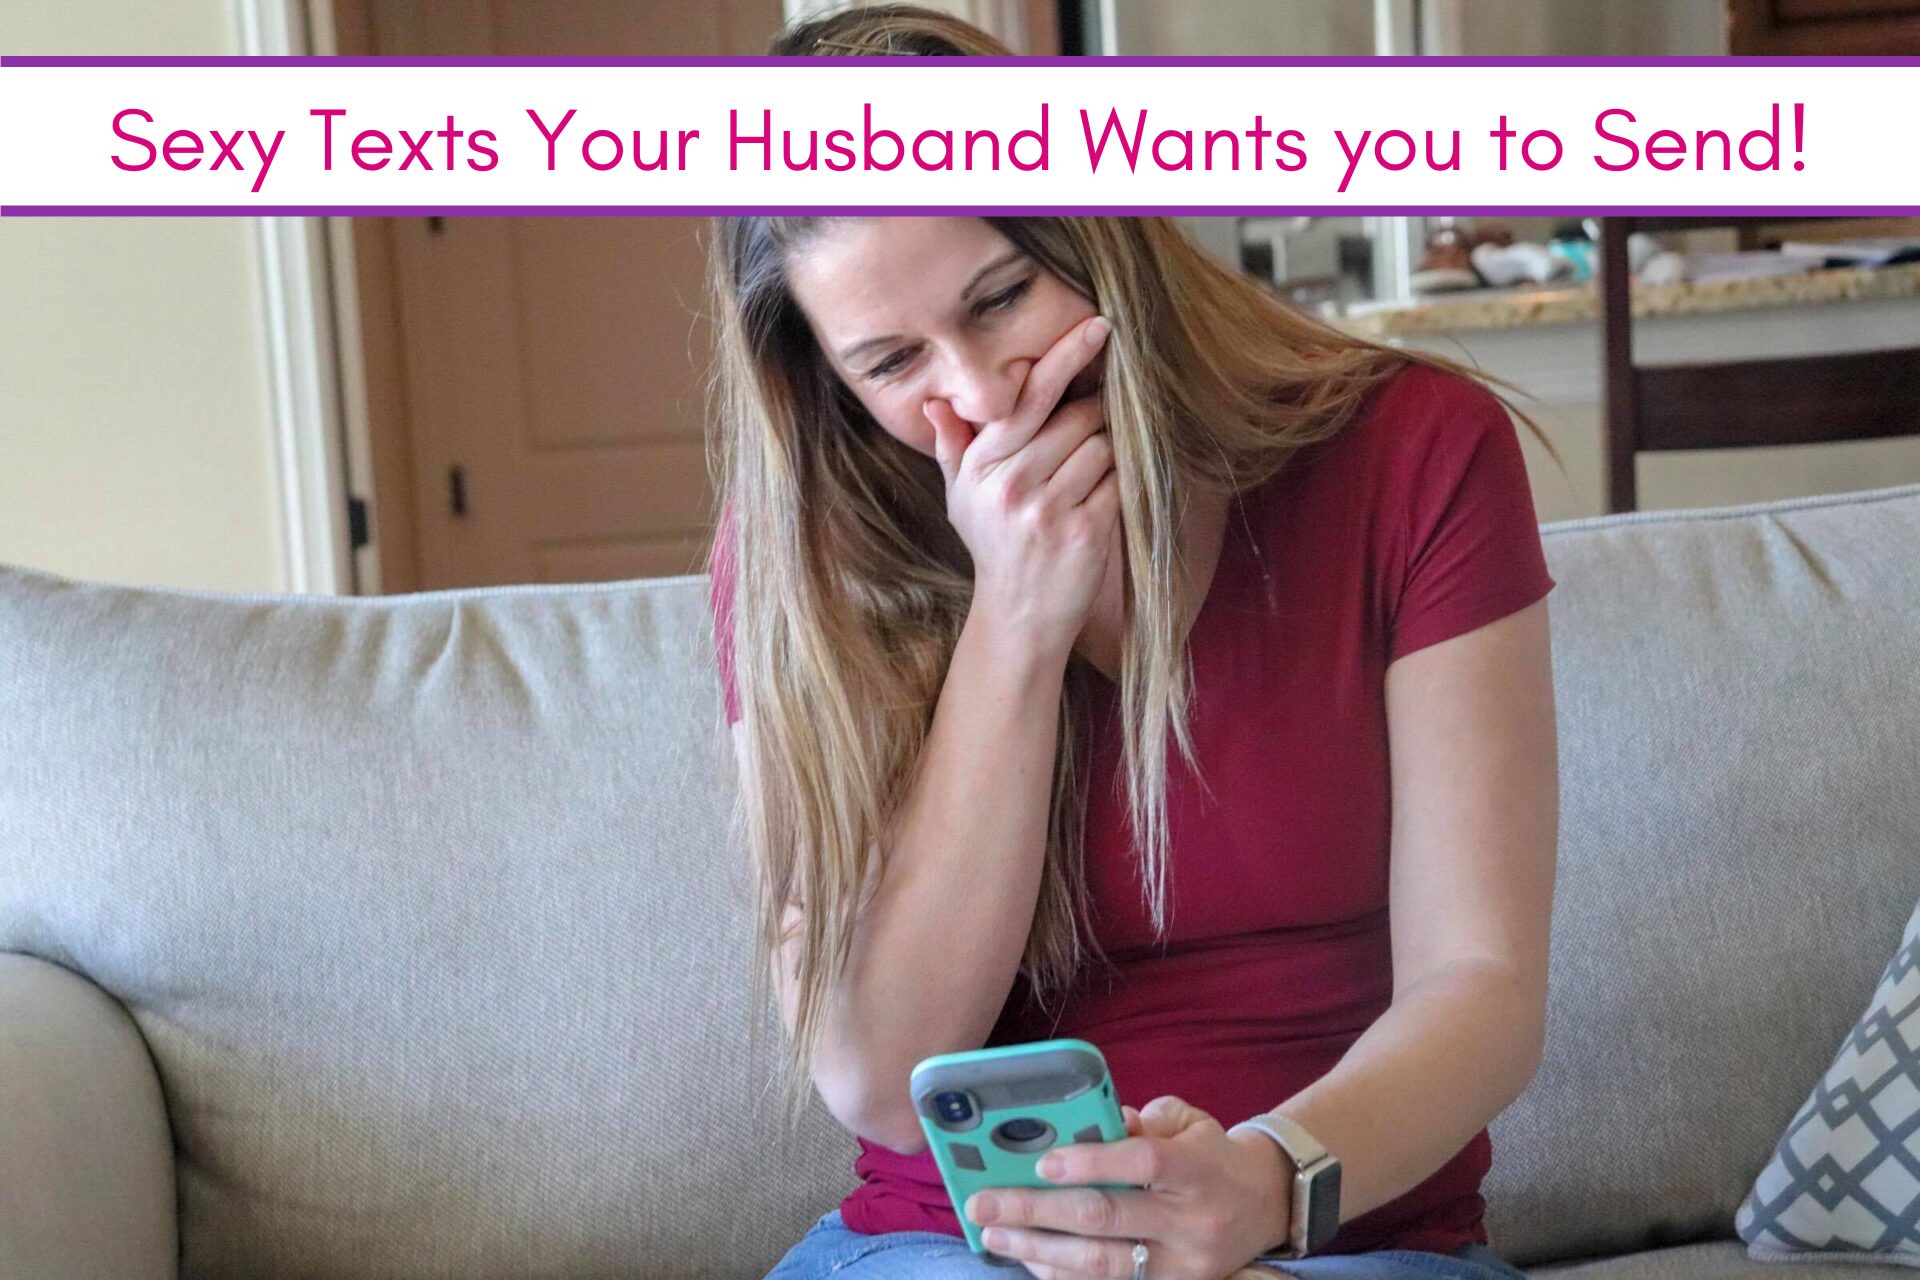 50 Sexy Texts Your Husband Wants you to Send! - Confessions of Parenting-  Fun Games, Jokes, and More